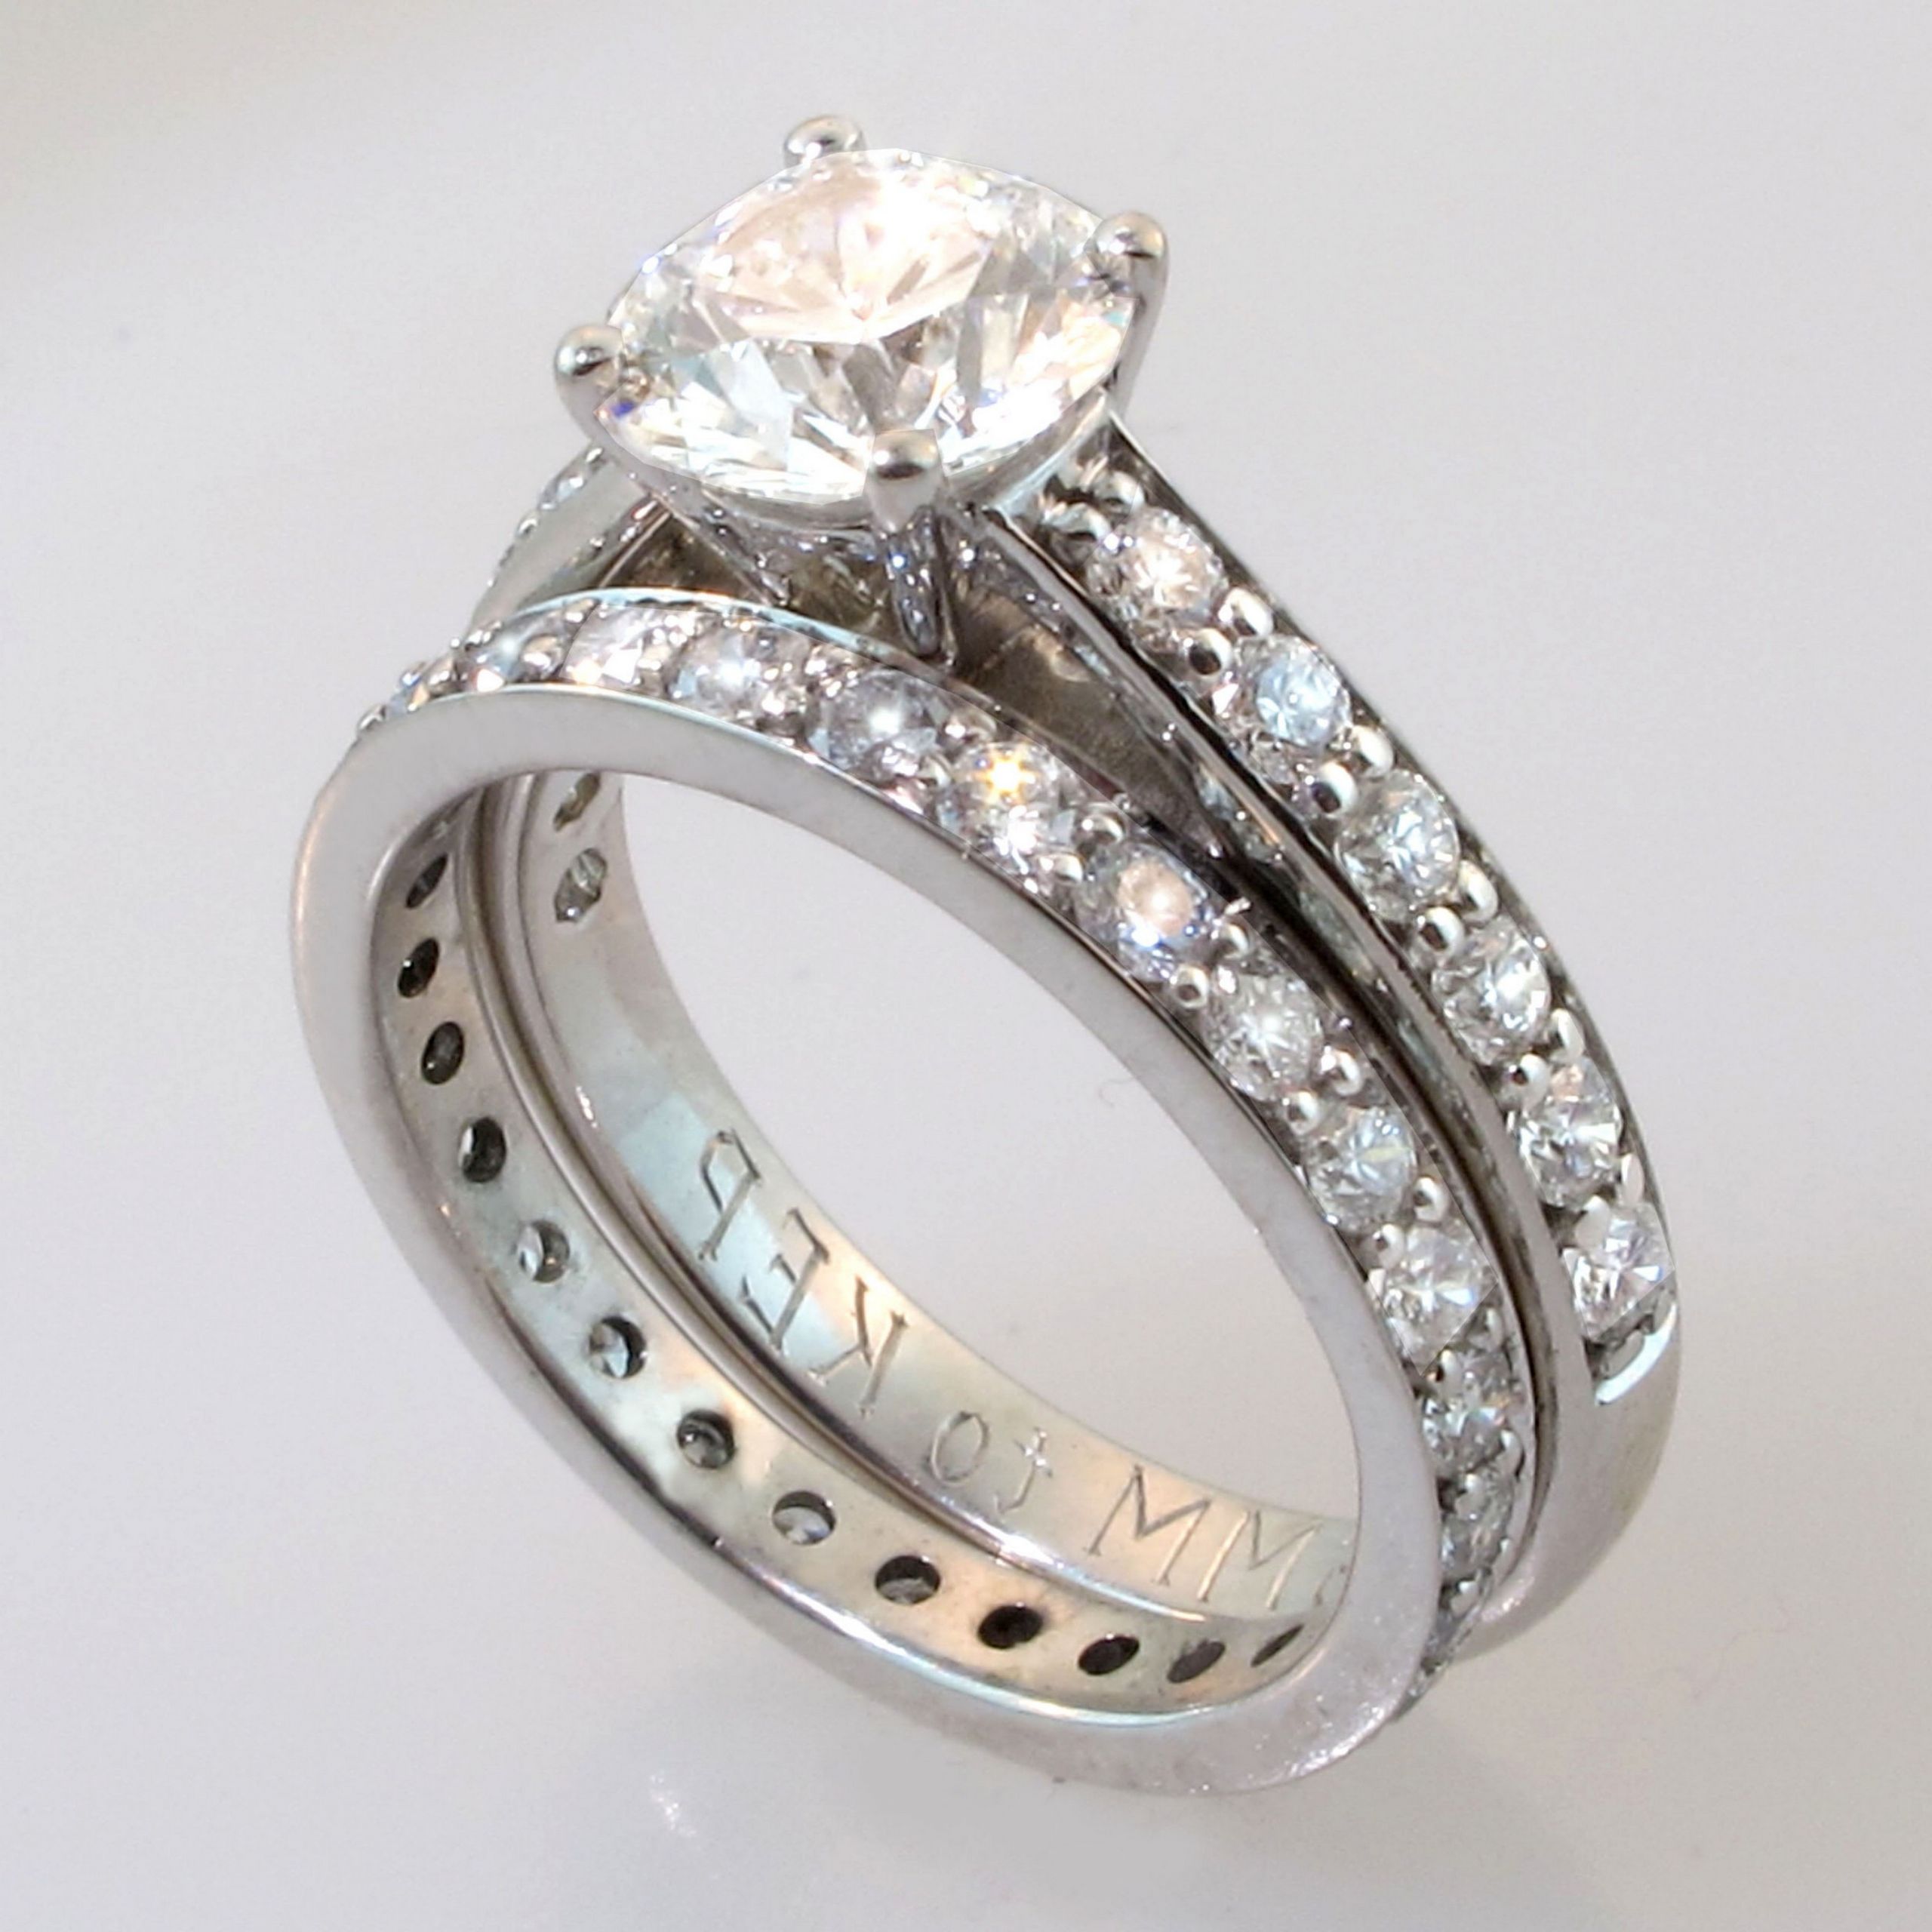 Affordable Wedding Ring Sets
 Why Should Make Wedding Ring Sets For Women and Also Men